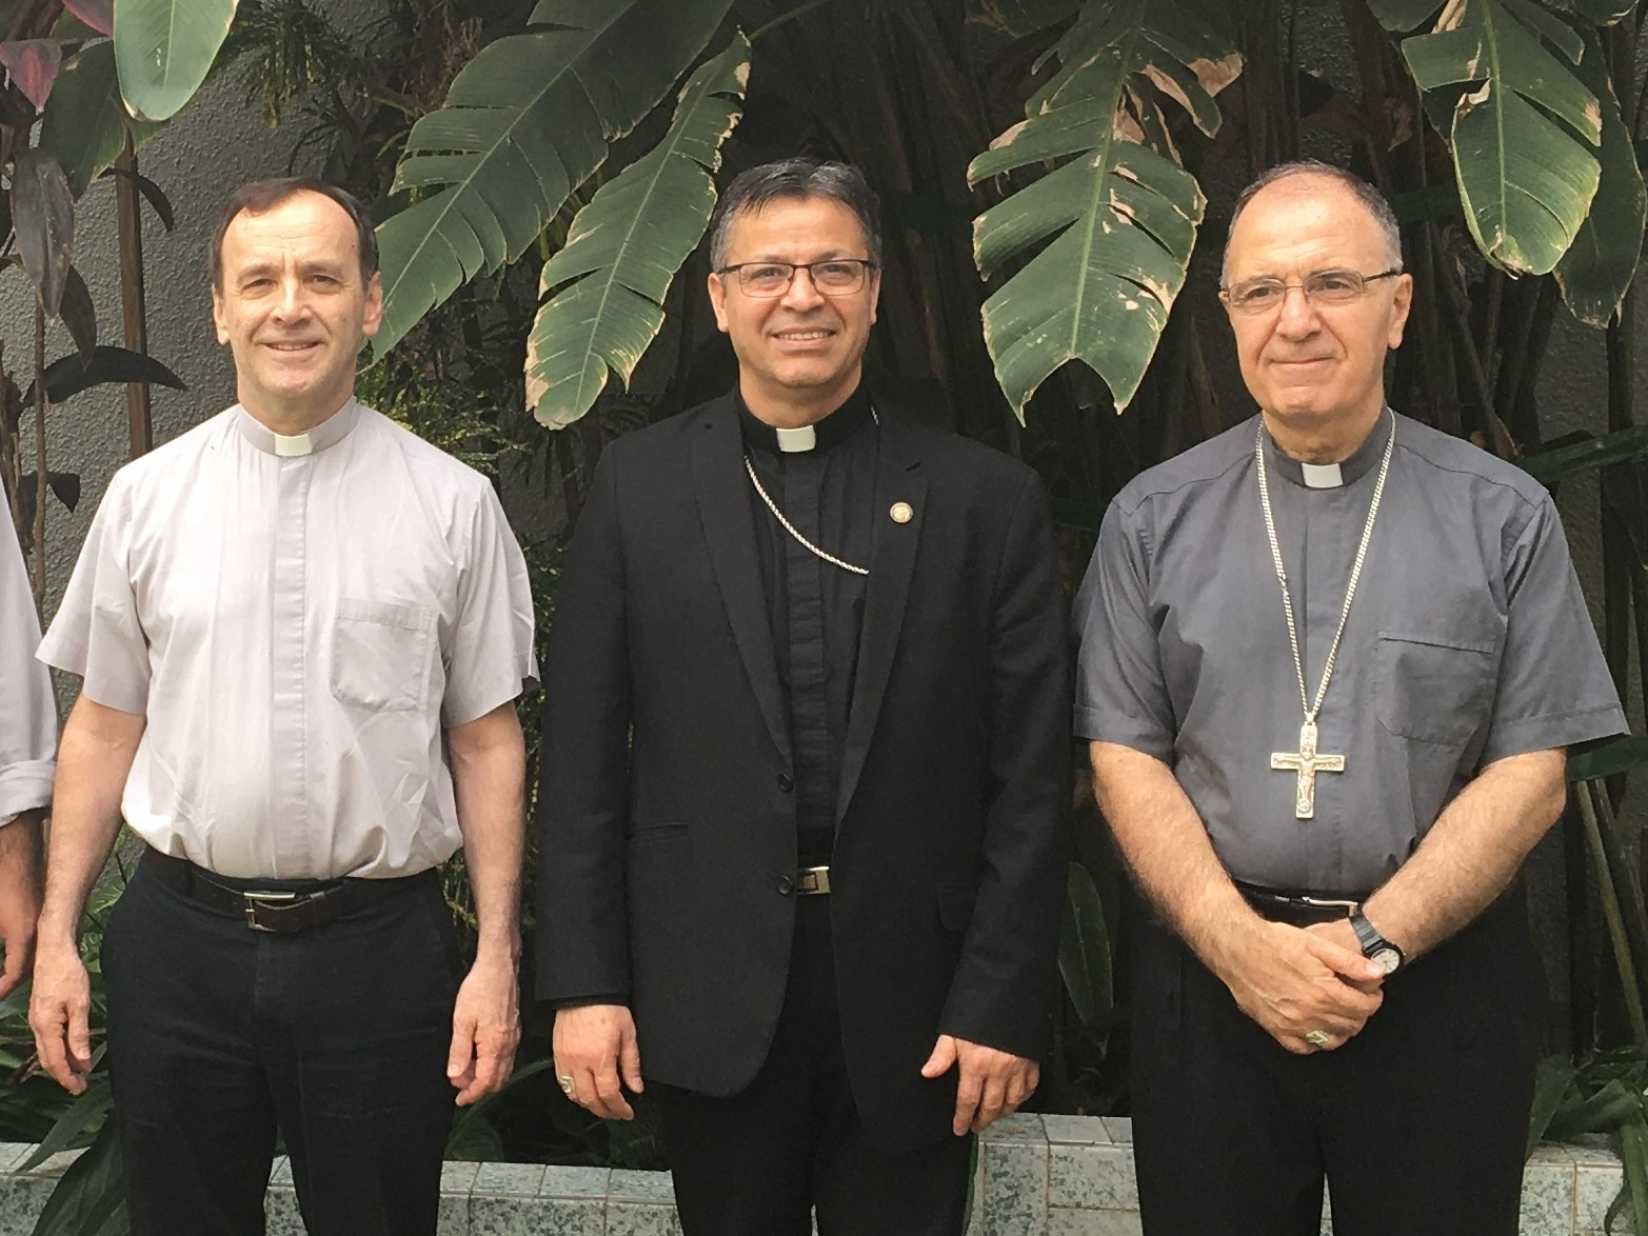 Collection Supports the Faith in Far-Flung Diocese in Latin America